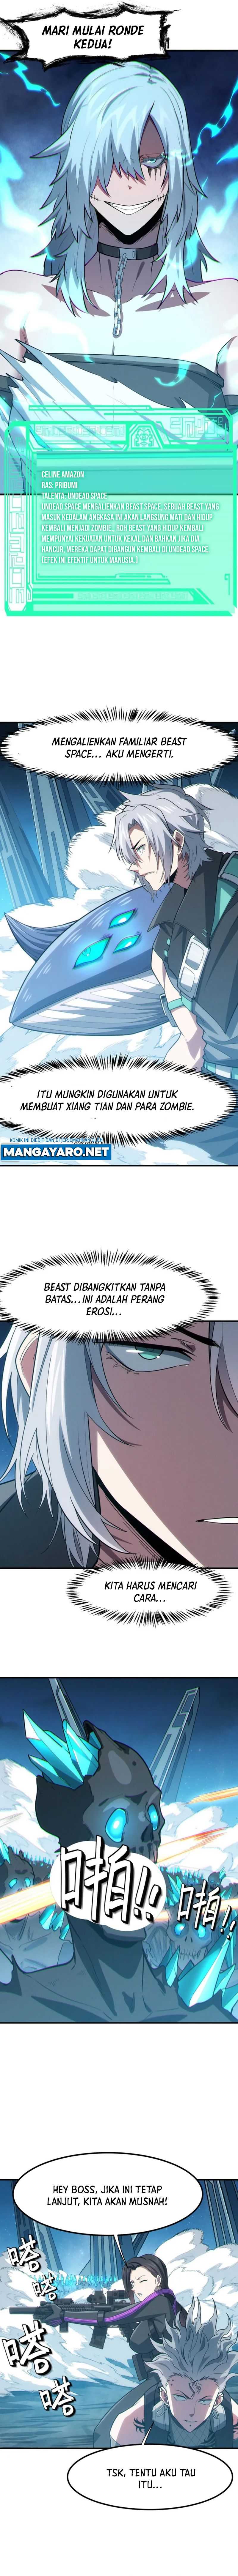 Beast Tamer: It All Starts With Mythical Rank Talent Chapter 57